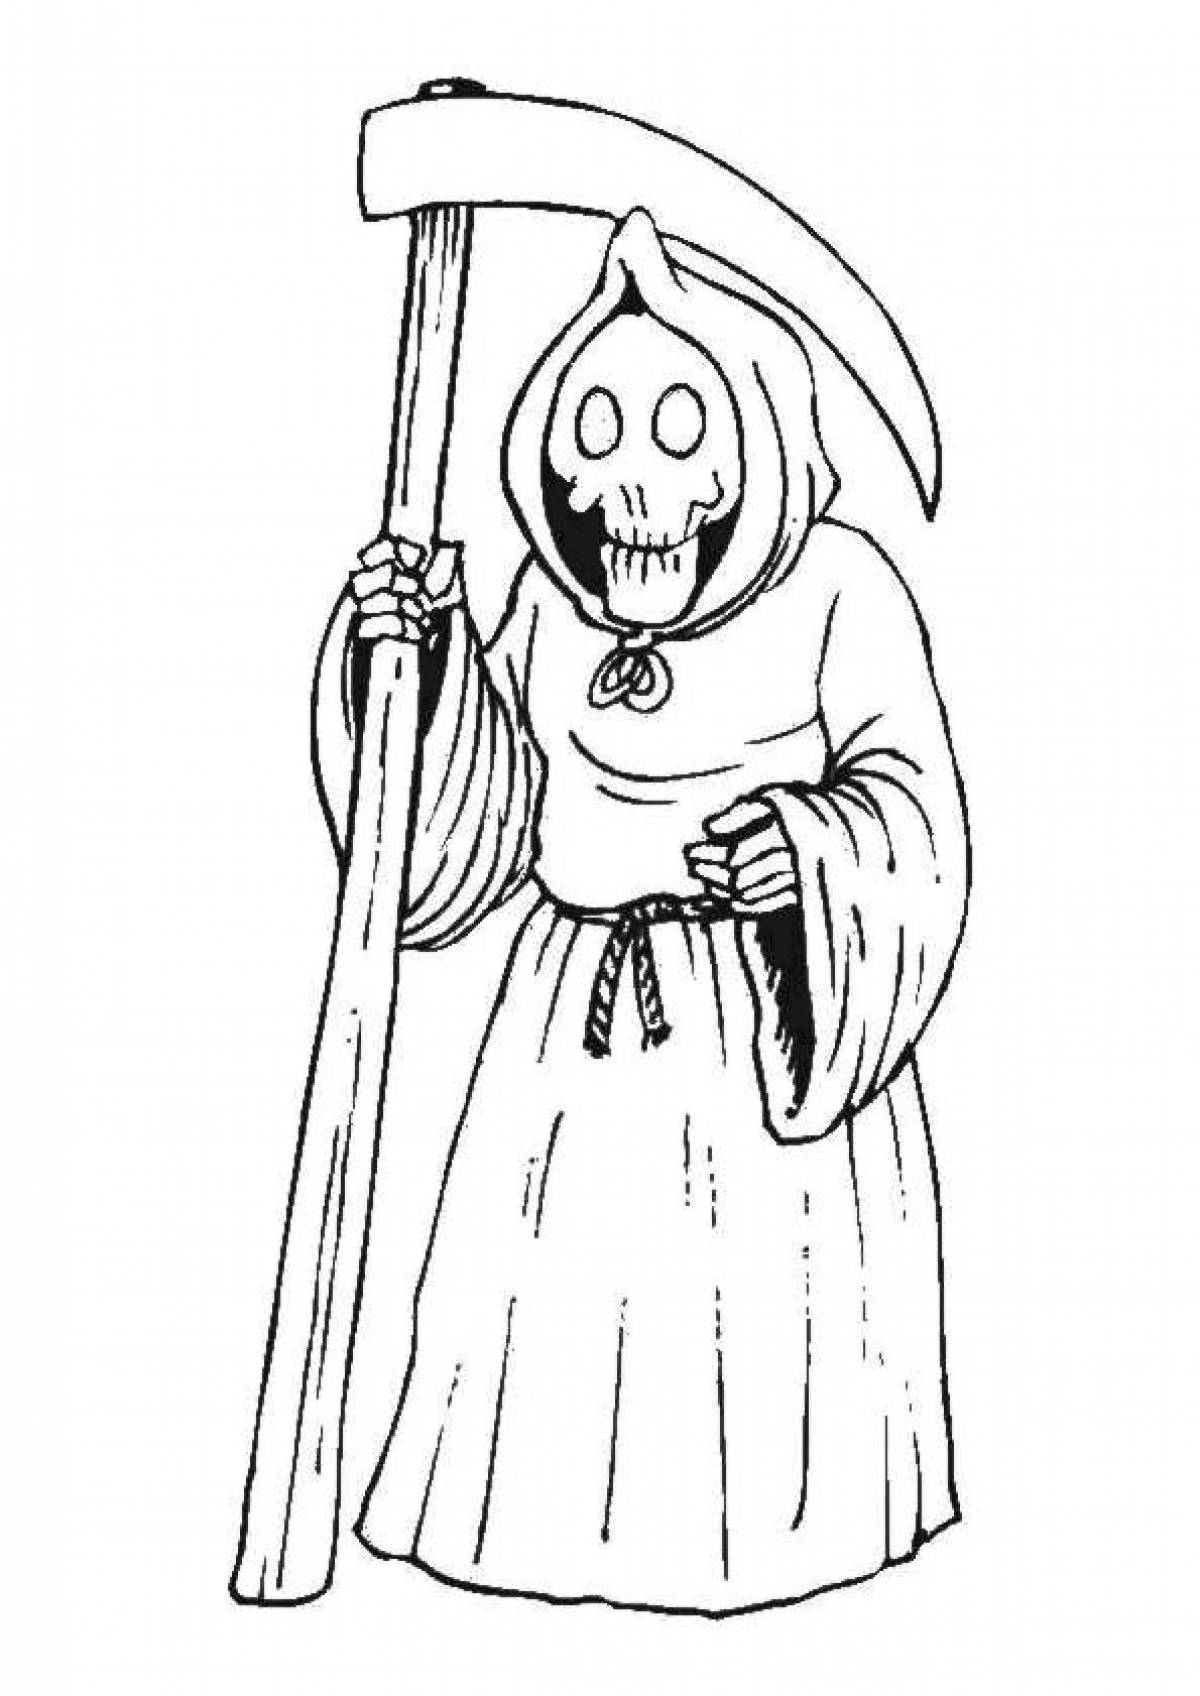 Scary stories about nefarious coloring pages